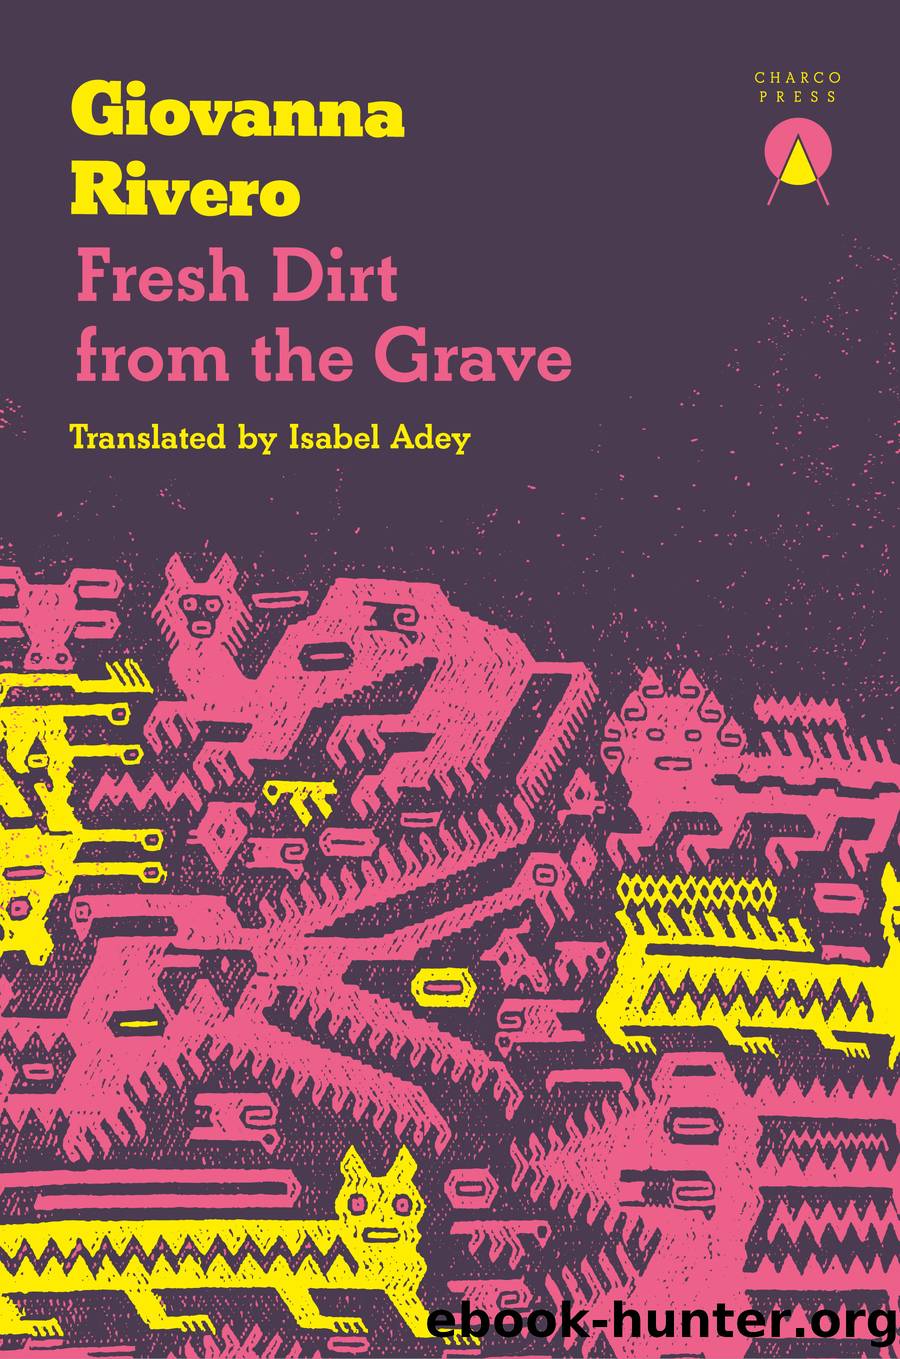 Fresh Dirt from the Grave by Giovanna Rivero